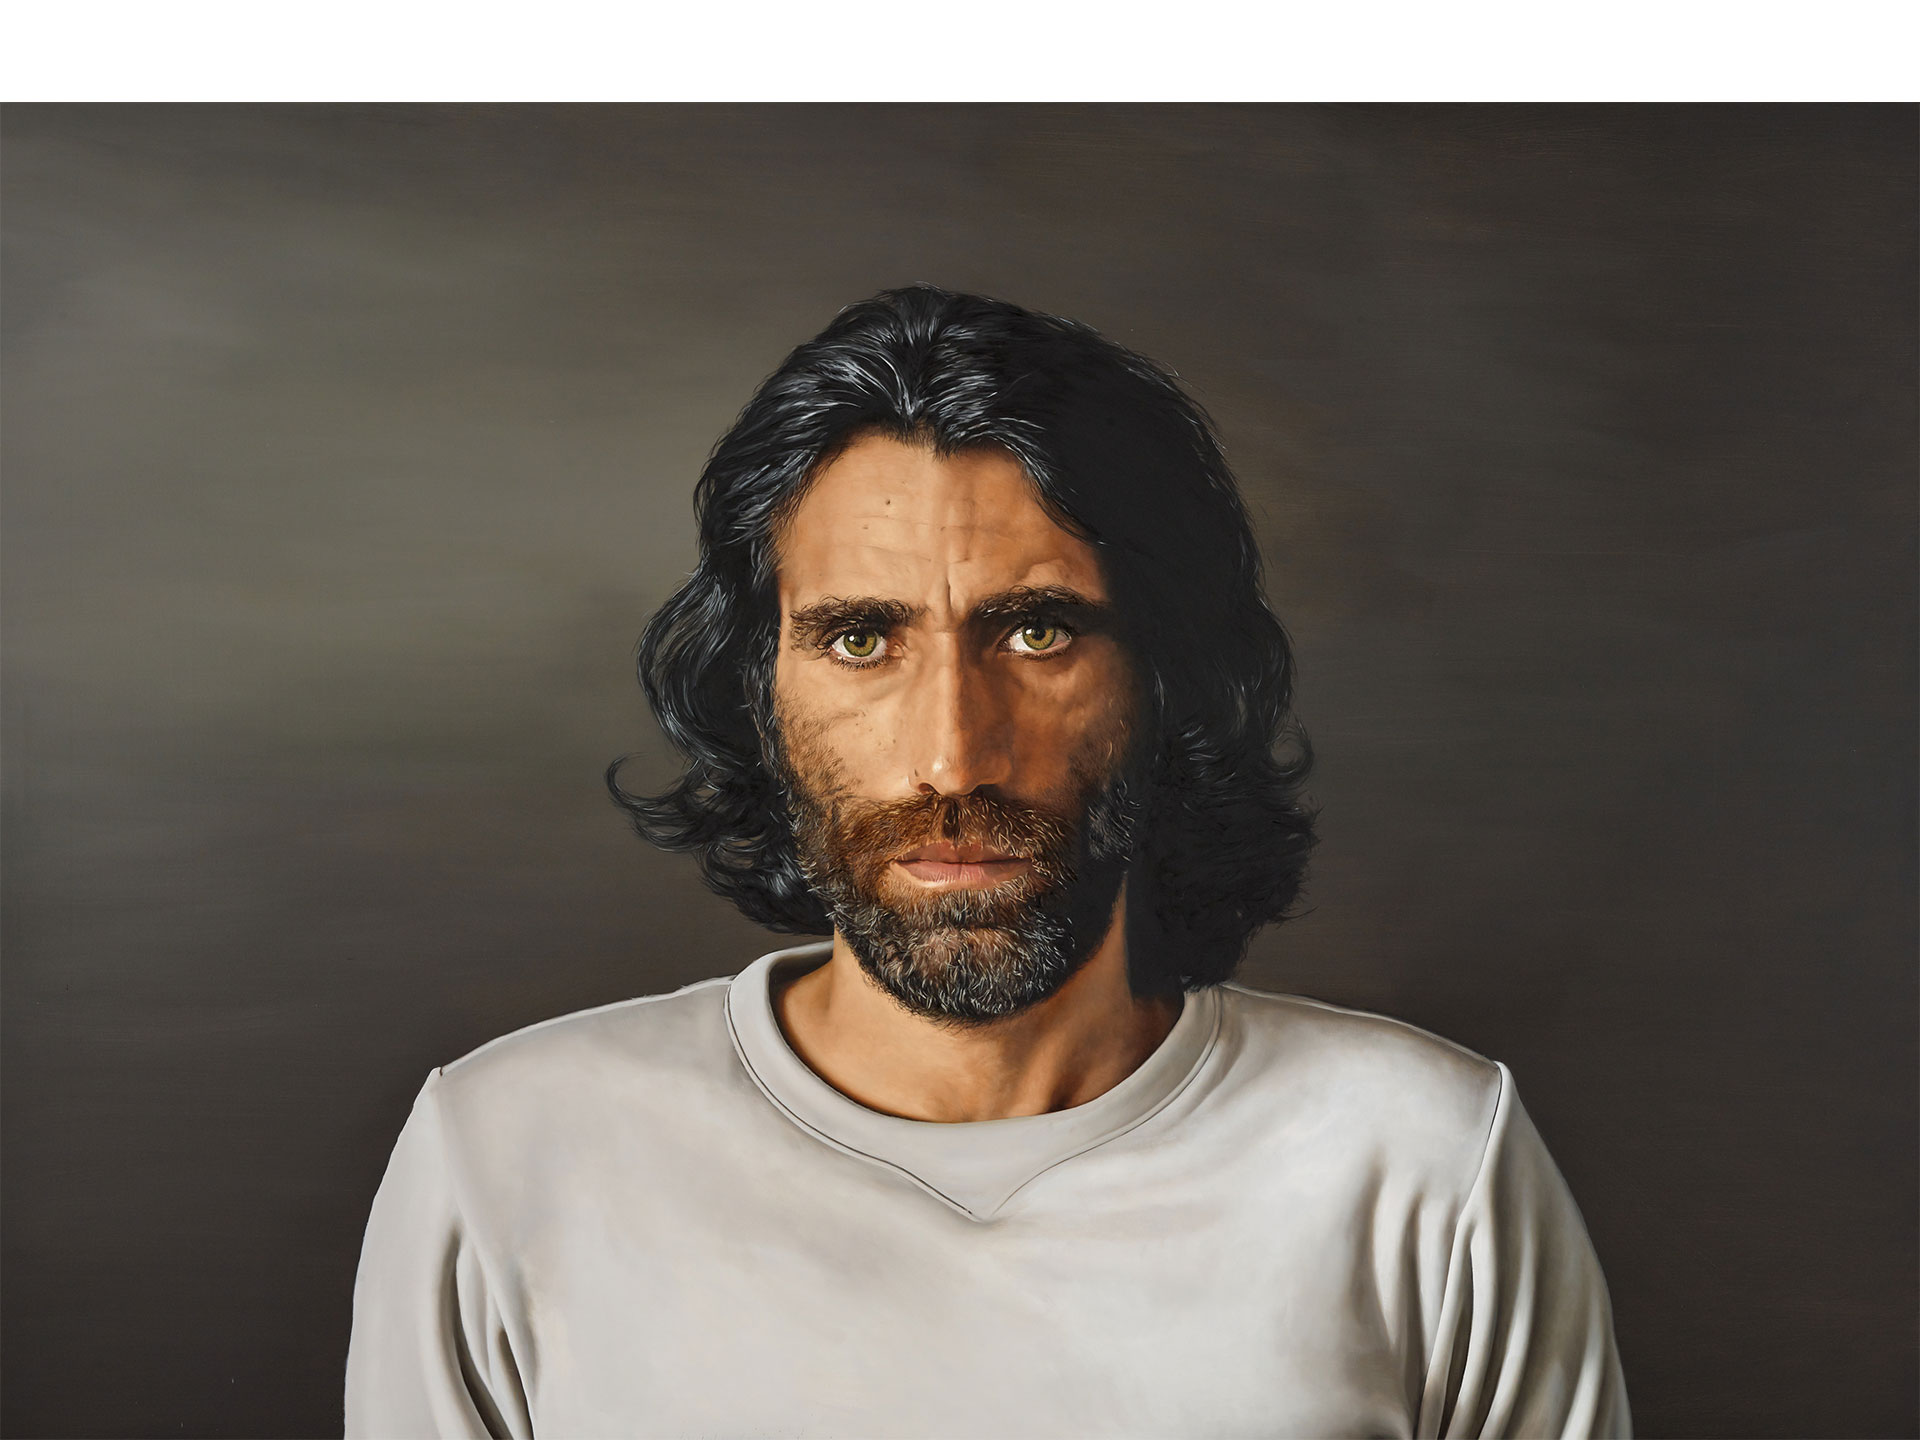 Artwork entered in the Archibald Prize 2020, Art Gallery of New South Wales